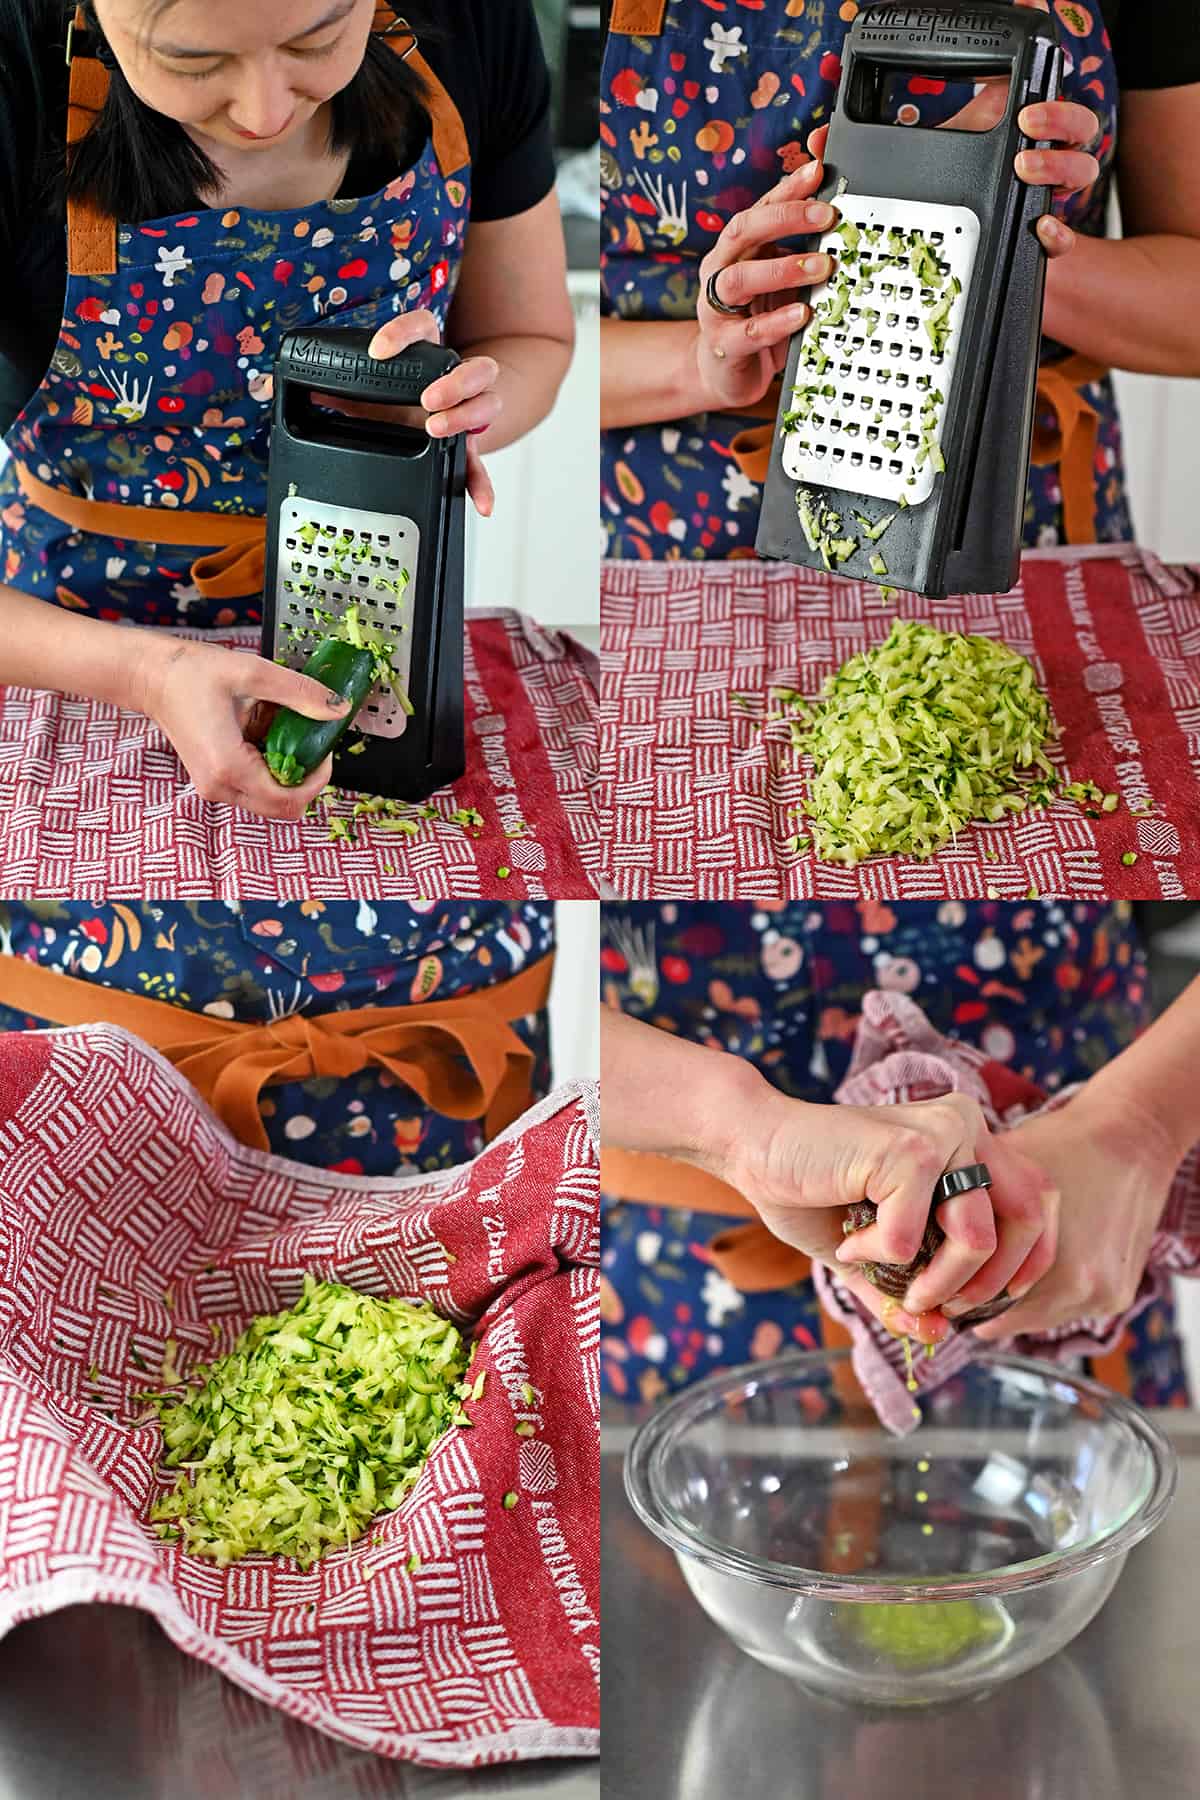 Four sequential photos that show an Asian woman grating a zucchini with a box grater and squeezing out the excess liquid using a red and white kitchen towel.